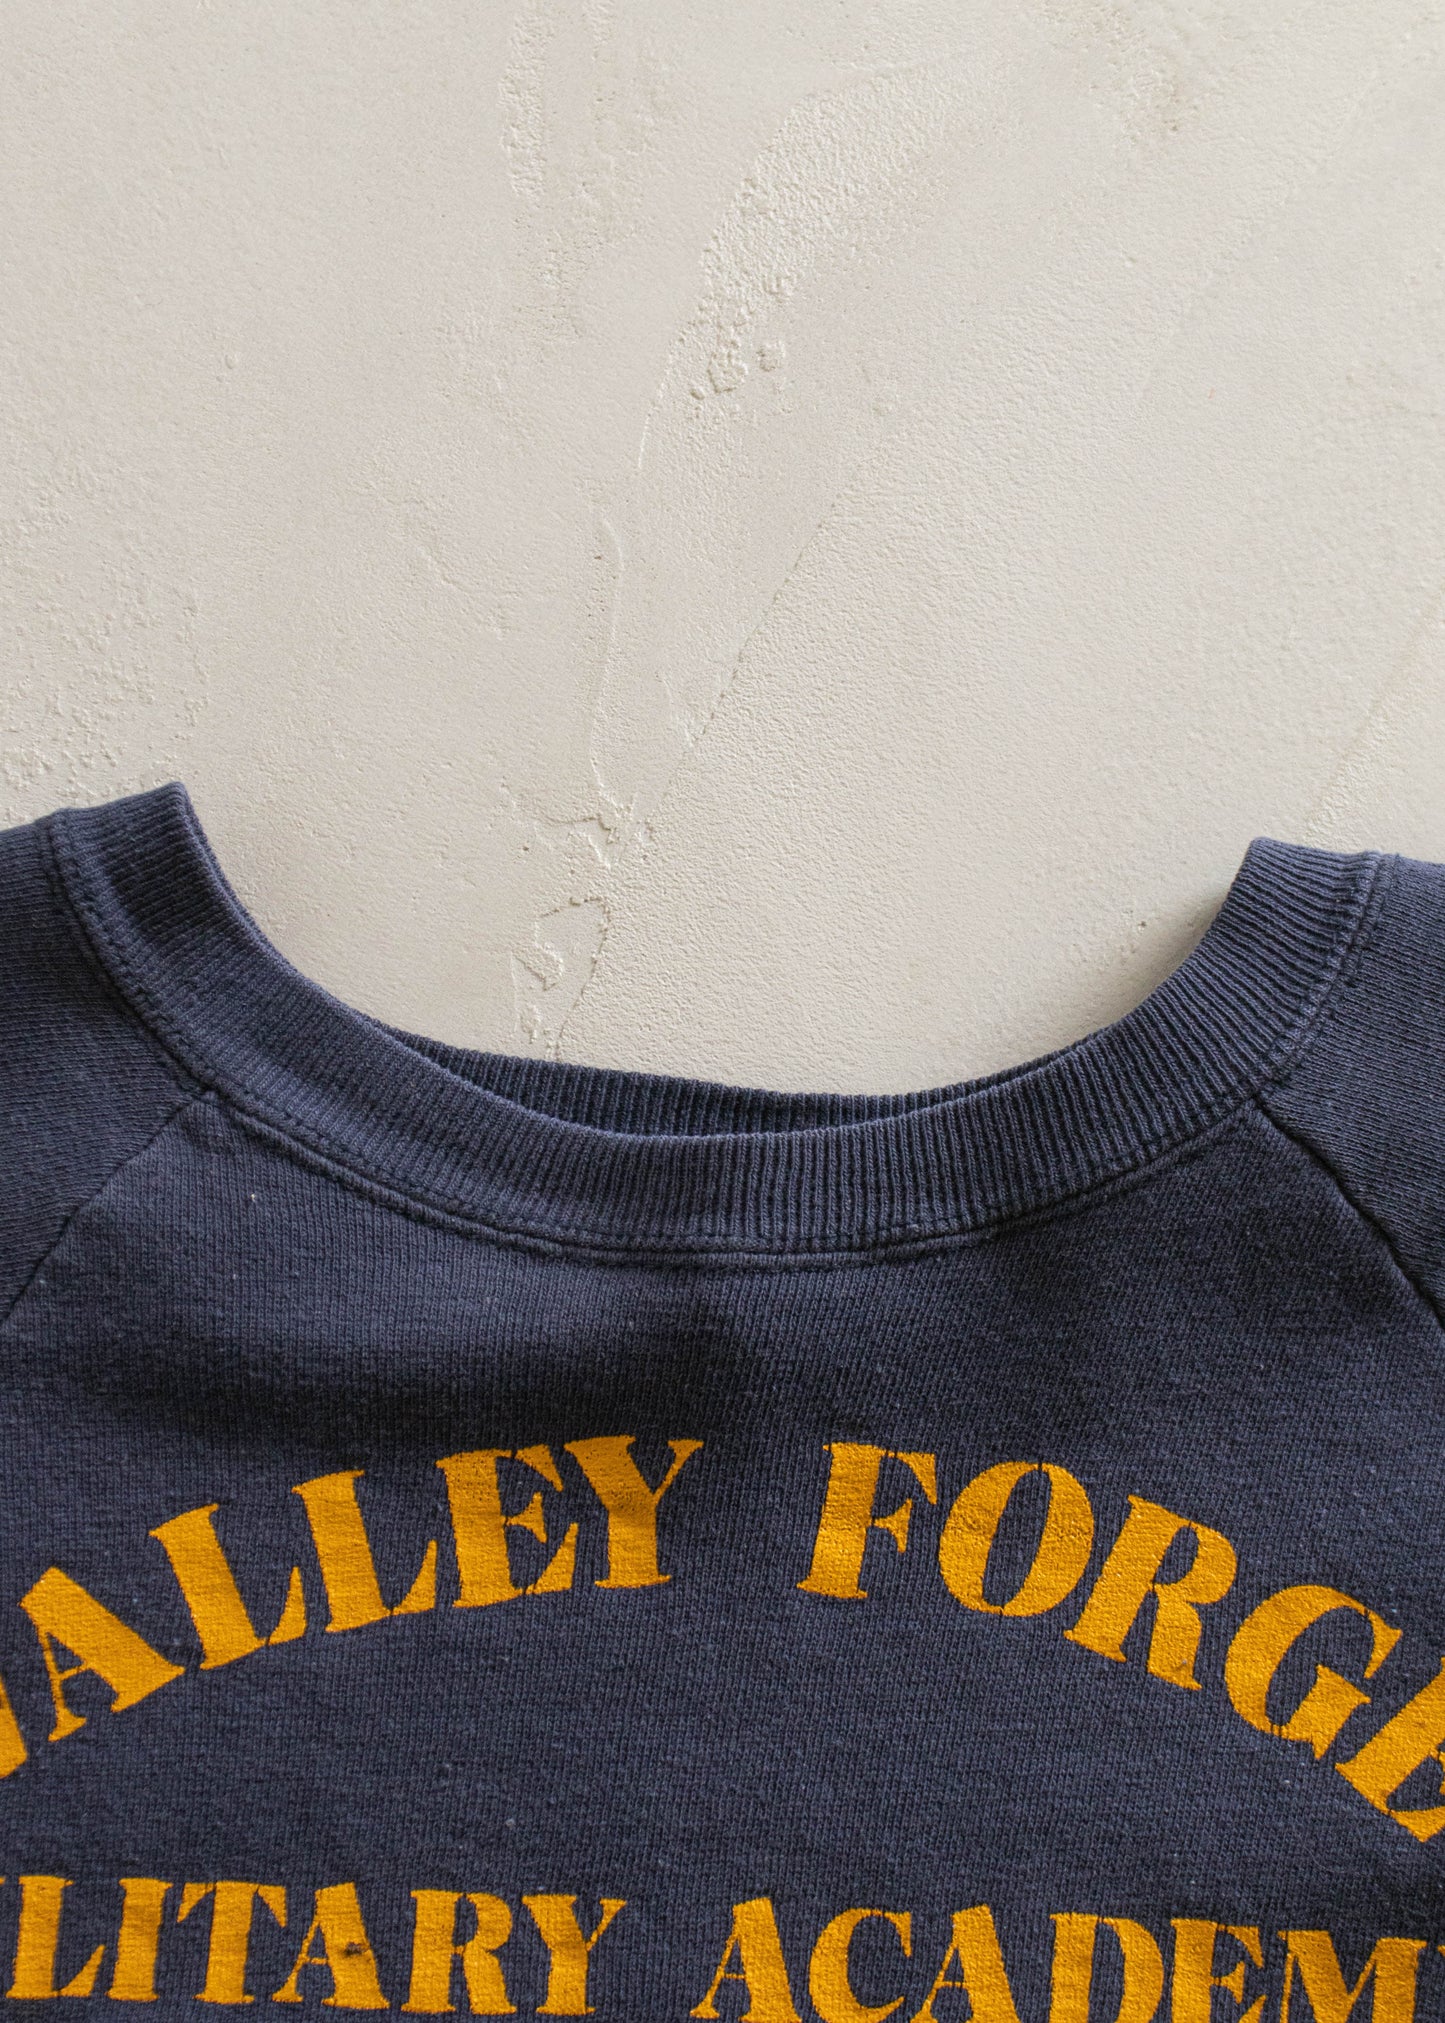 1970s Russell Athletic Valley Forge Military Academy Sweatshirt Size M/L